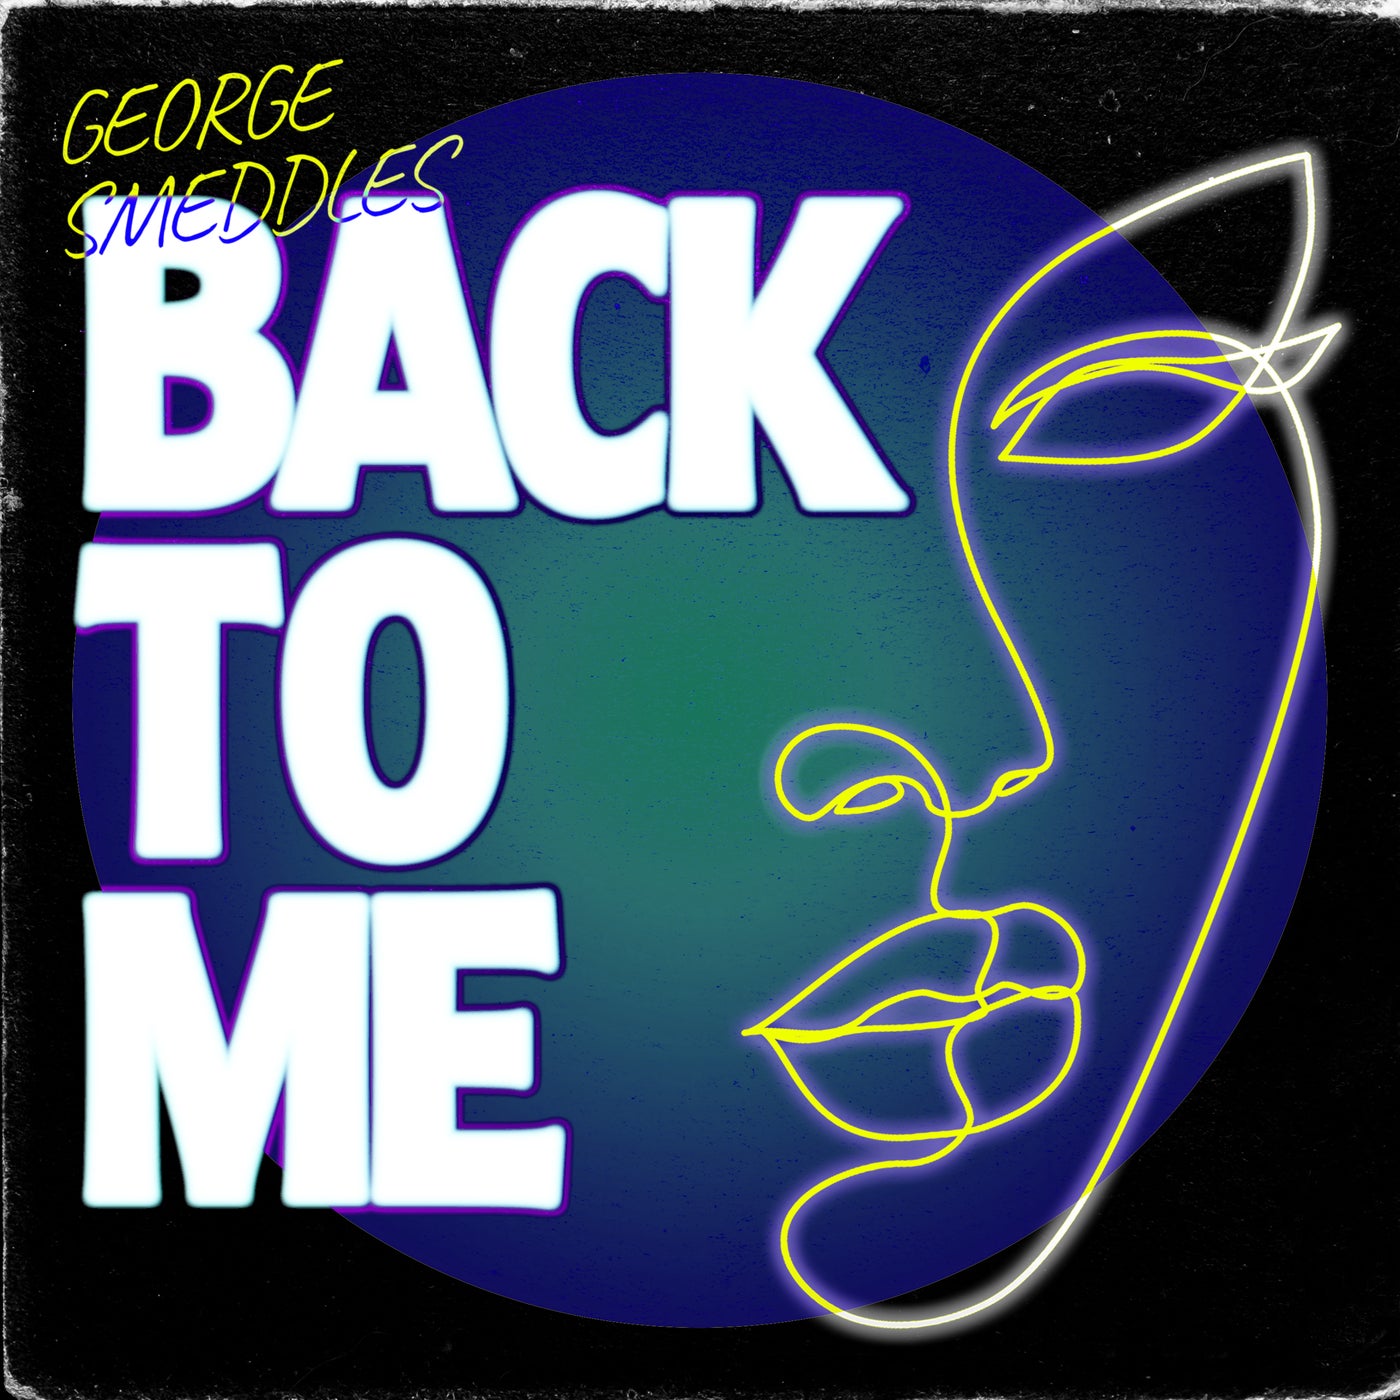 George Smeddles – Back To Me – Extended Mix [UL03104]